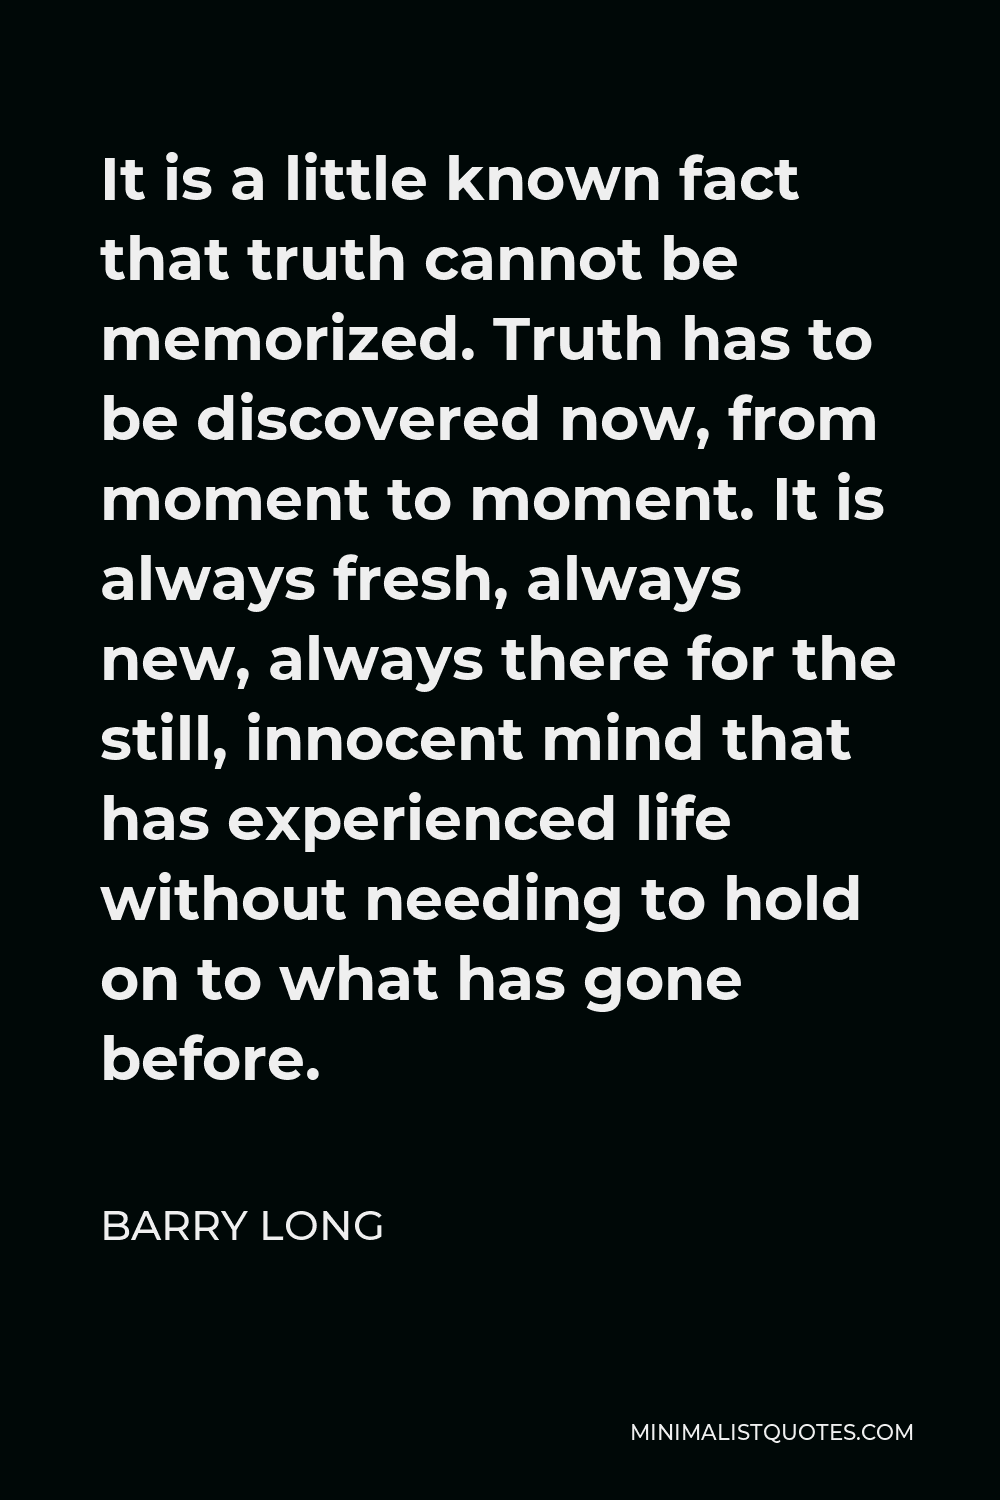 Barry Long Quote - It is a little known fact that truth cannot be memorized. Truth has to be discovered now, from moment to moment. It is always fresh, always new, always there for the still, innocent mind that has experienced life without needing to hold on to what has gone before.